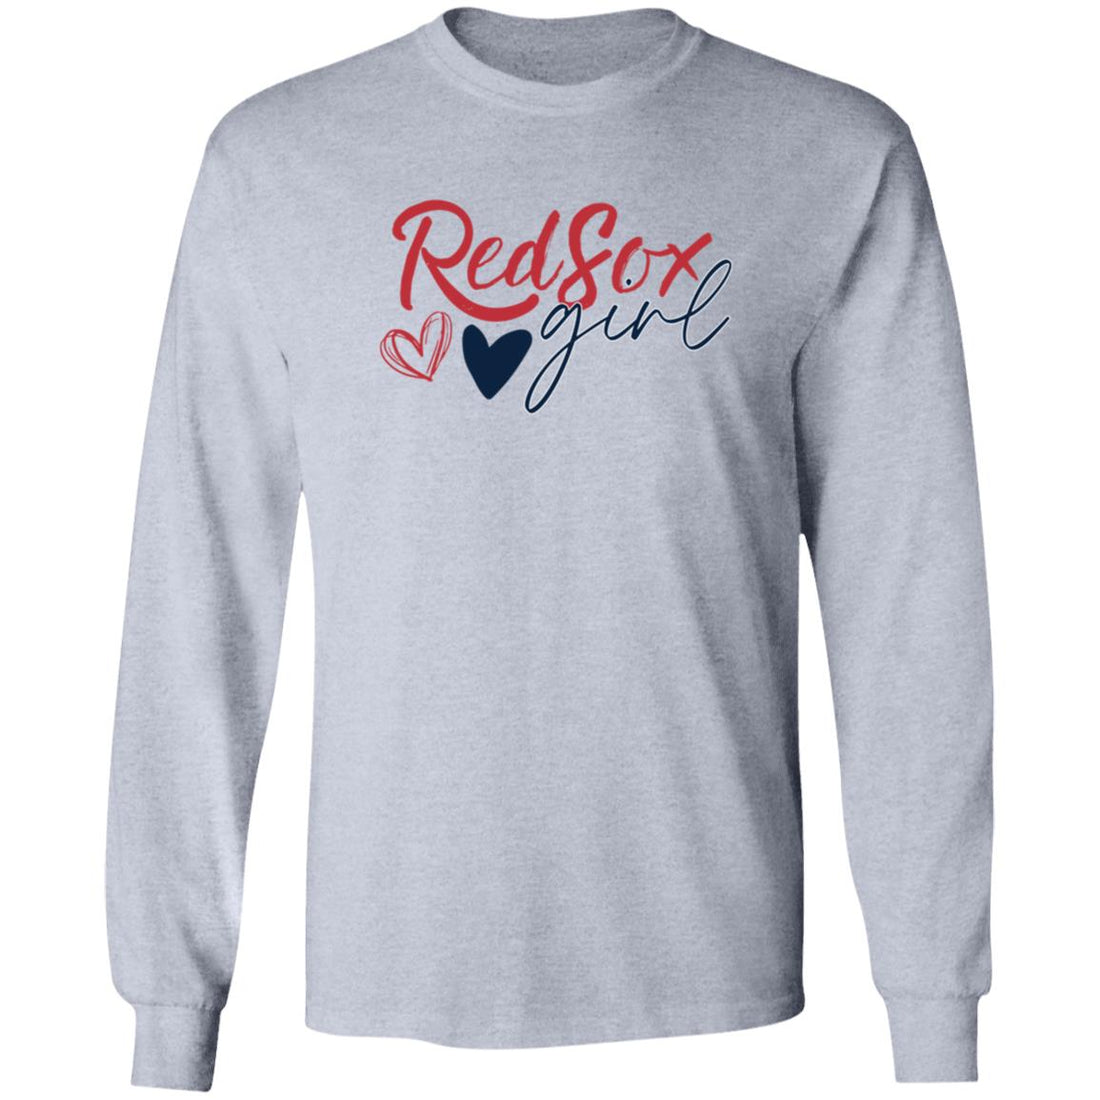 Red Sox Girl G240 LS T-Shirt - T-Shirts - Positively Sassy - Red Sox Girl G240 LS T-Shirt